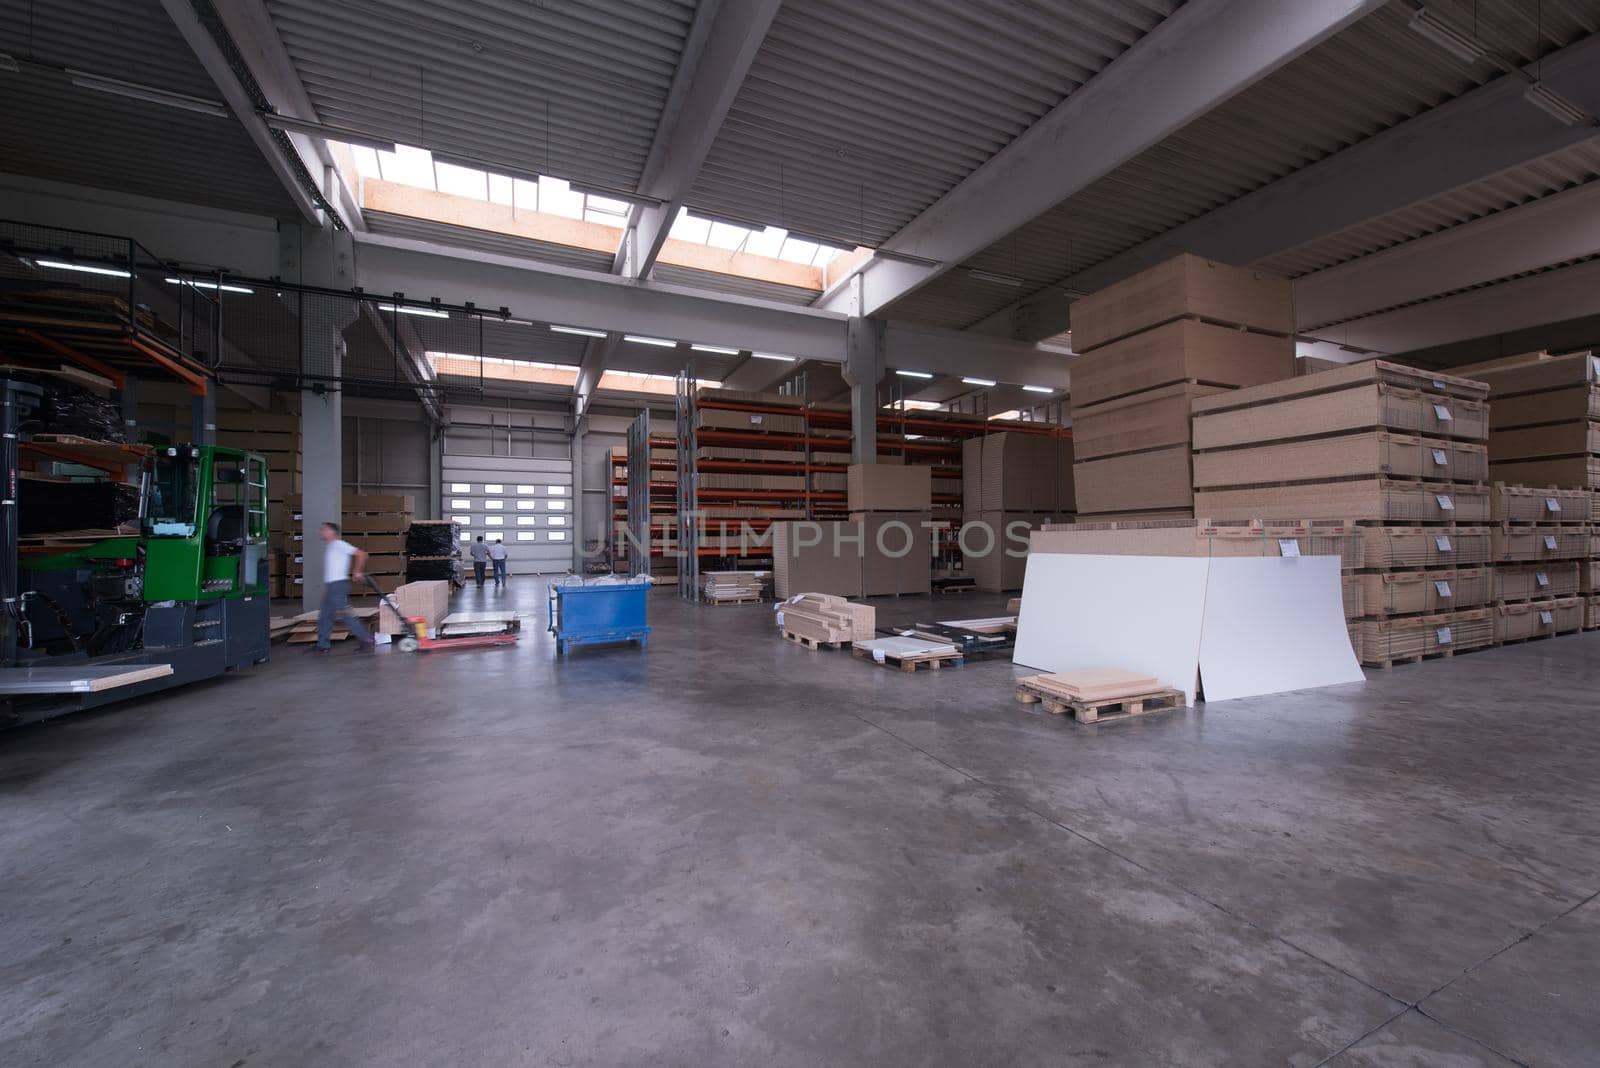 production Department at a furniture factory